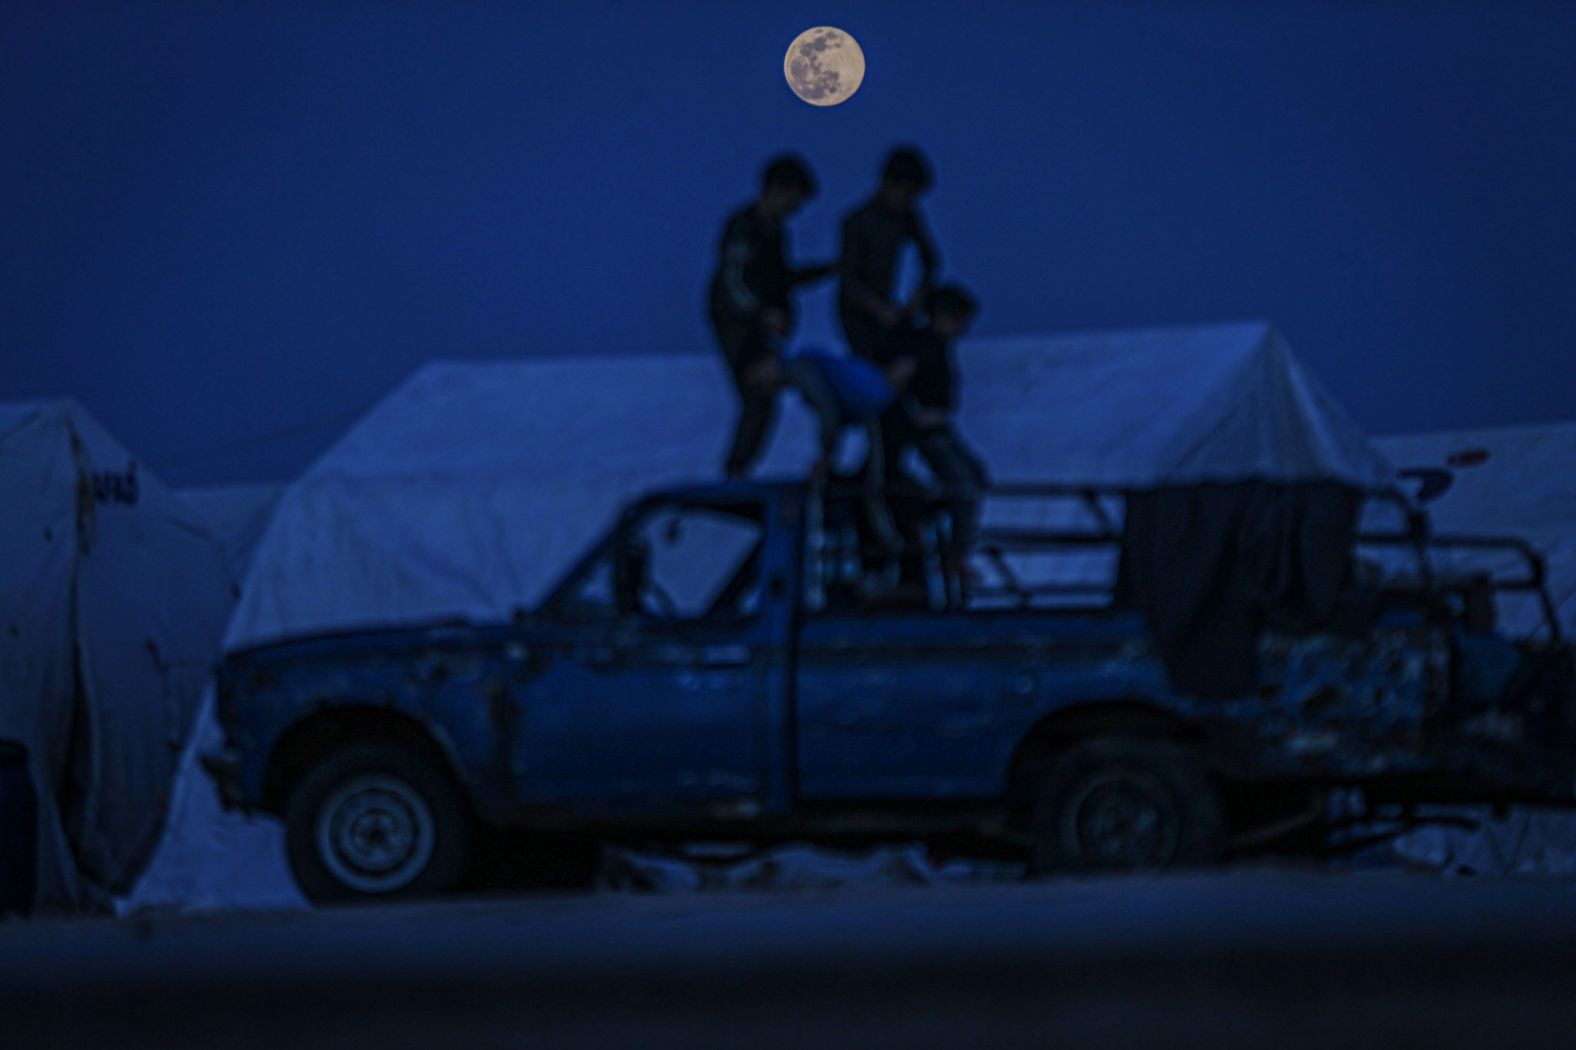 Syrian kids stand on a vehicle under the moon at the Maarrat Misrin camp in Idlib province, Syria.